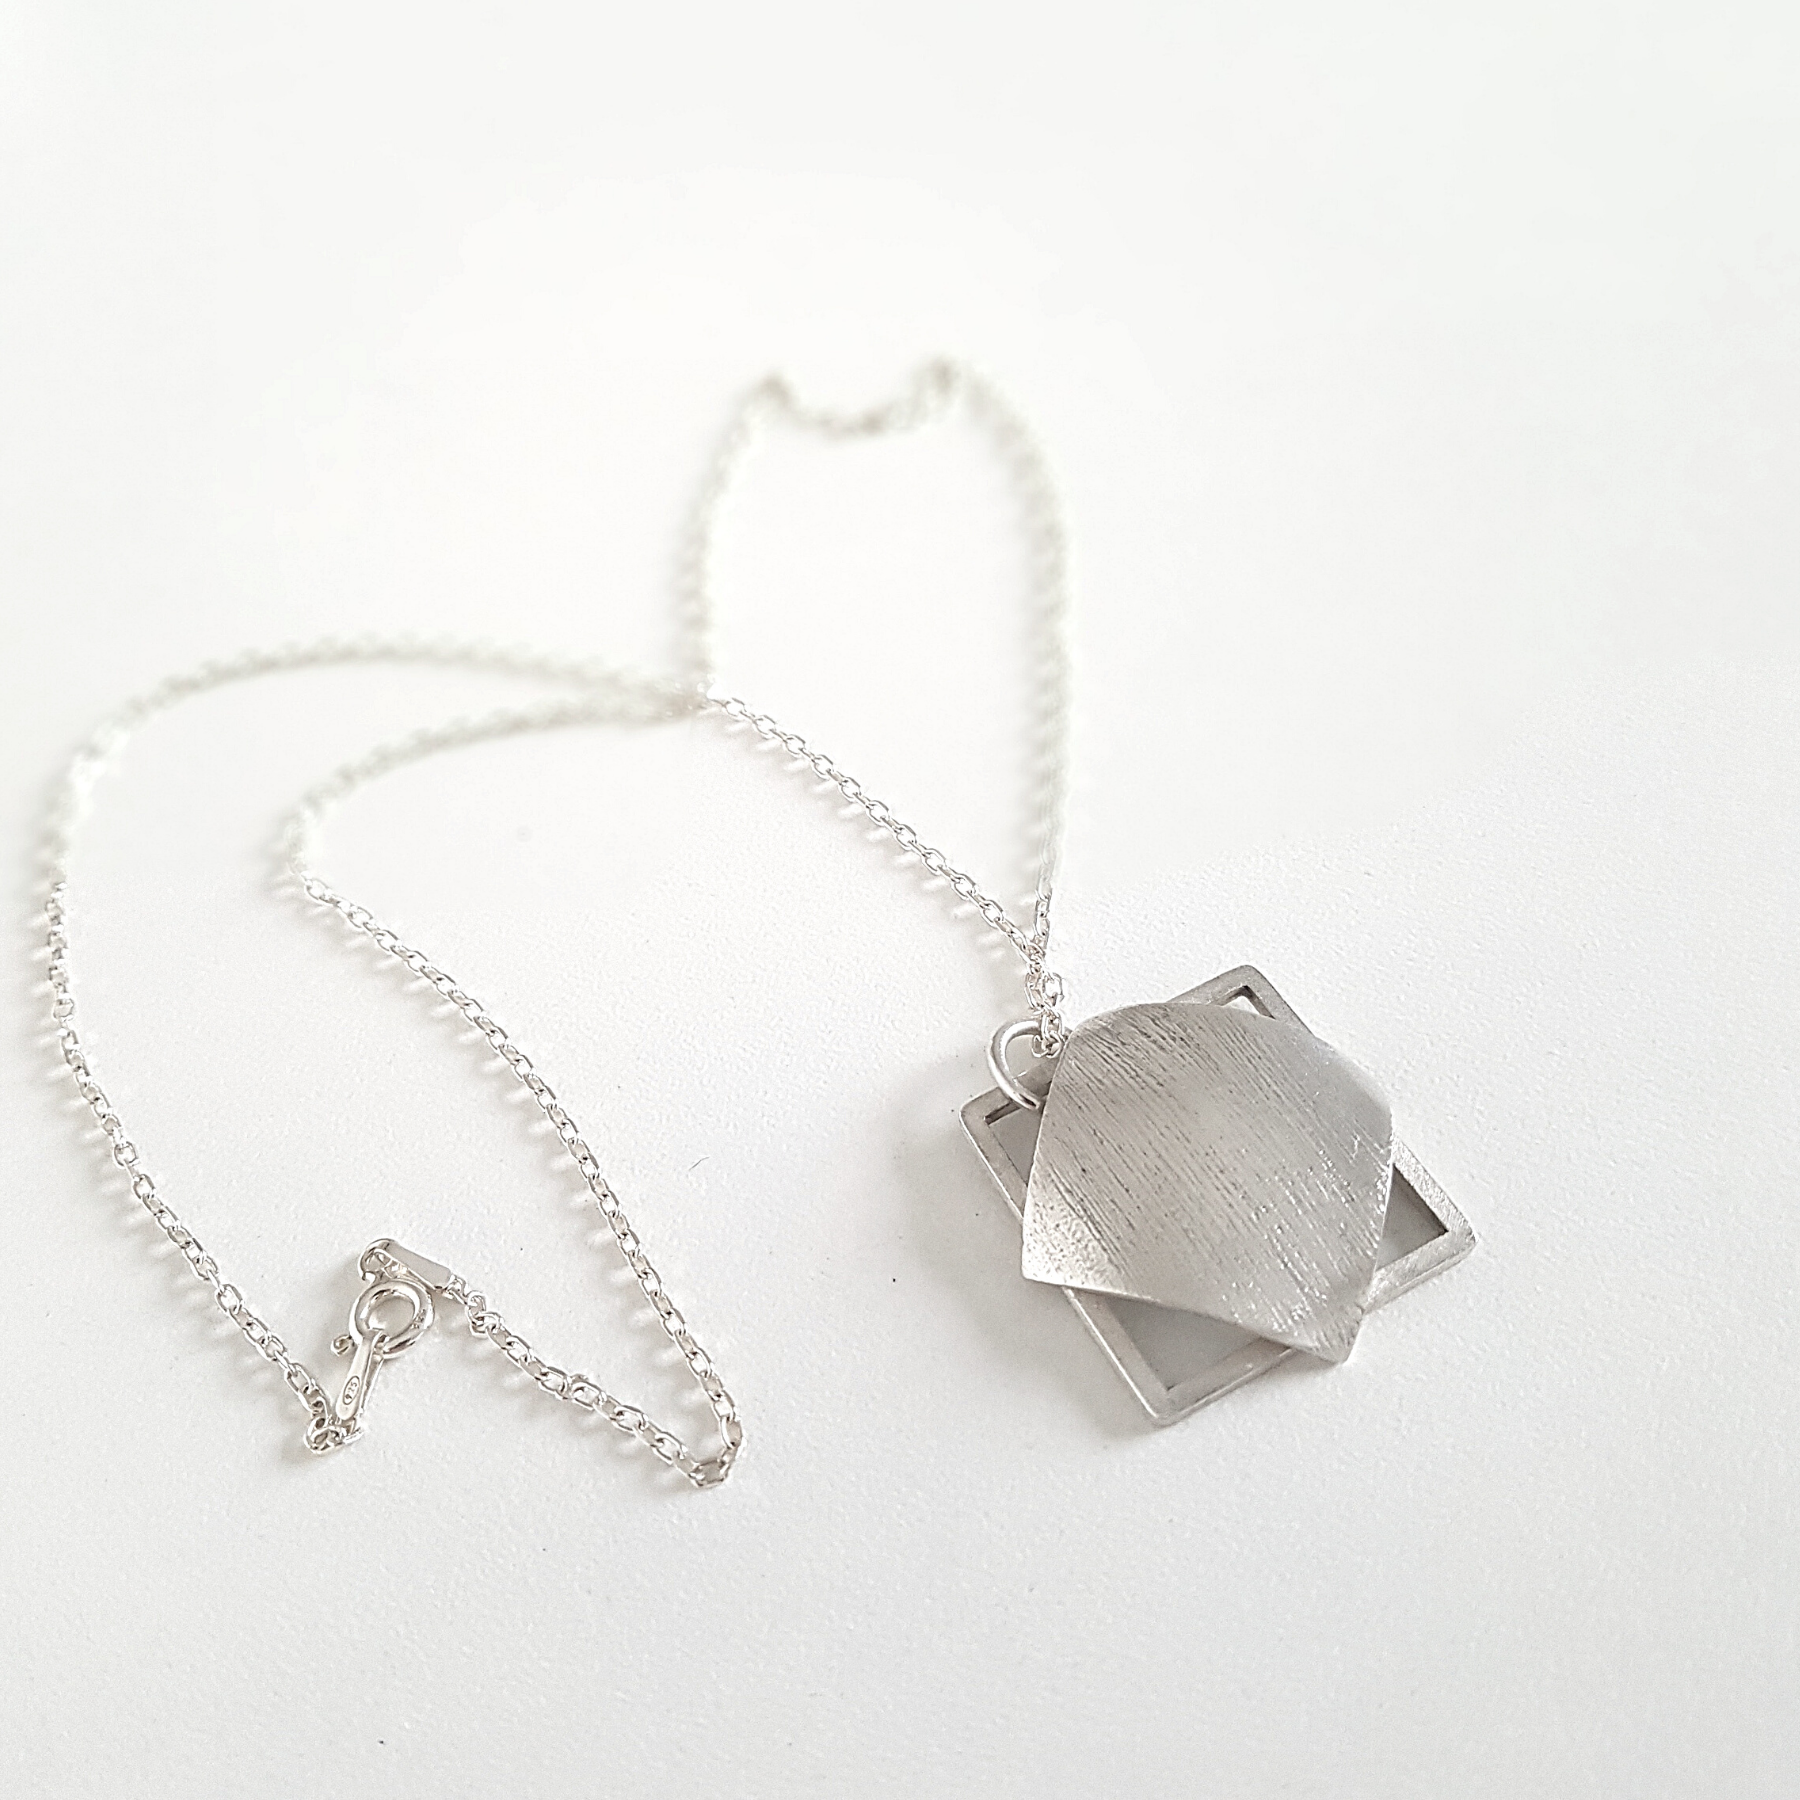 Geometric pendant is shown on the white surface.